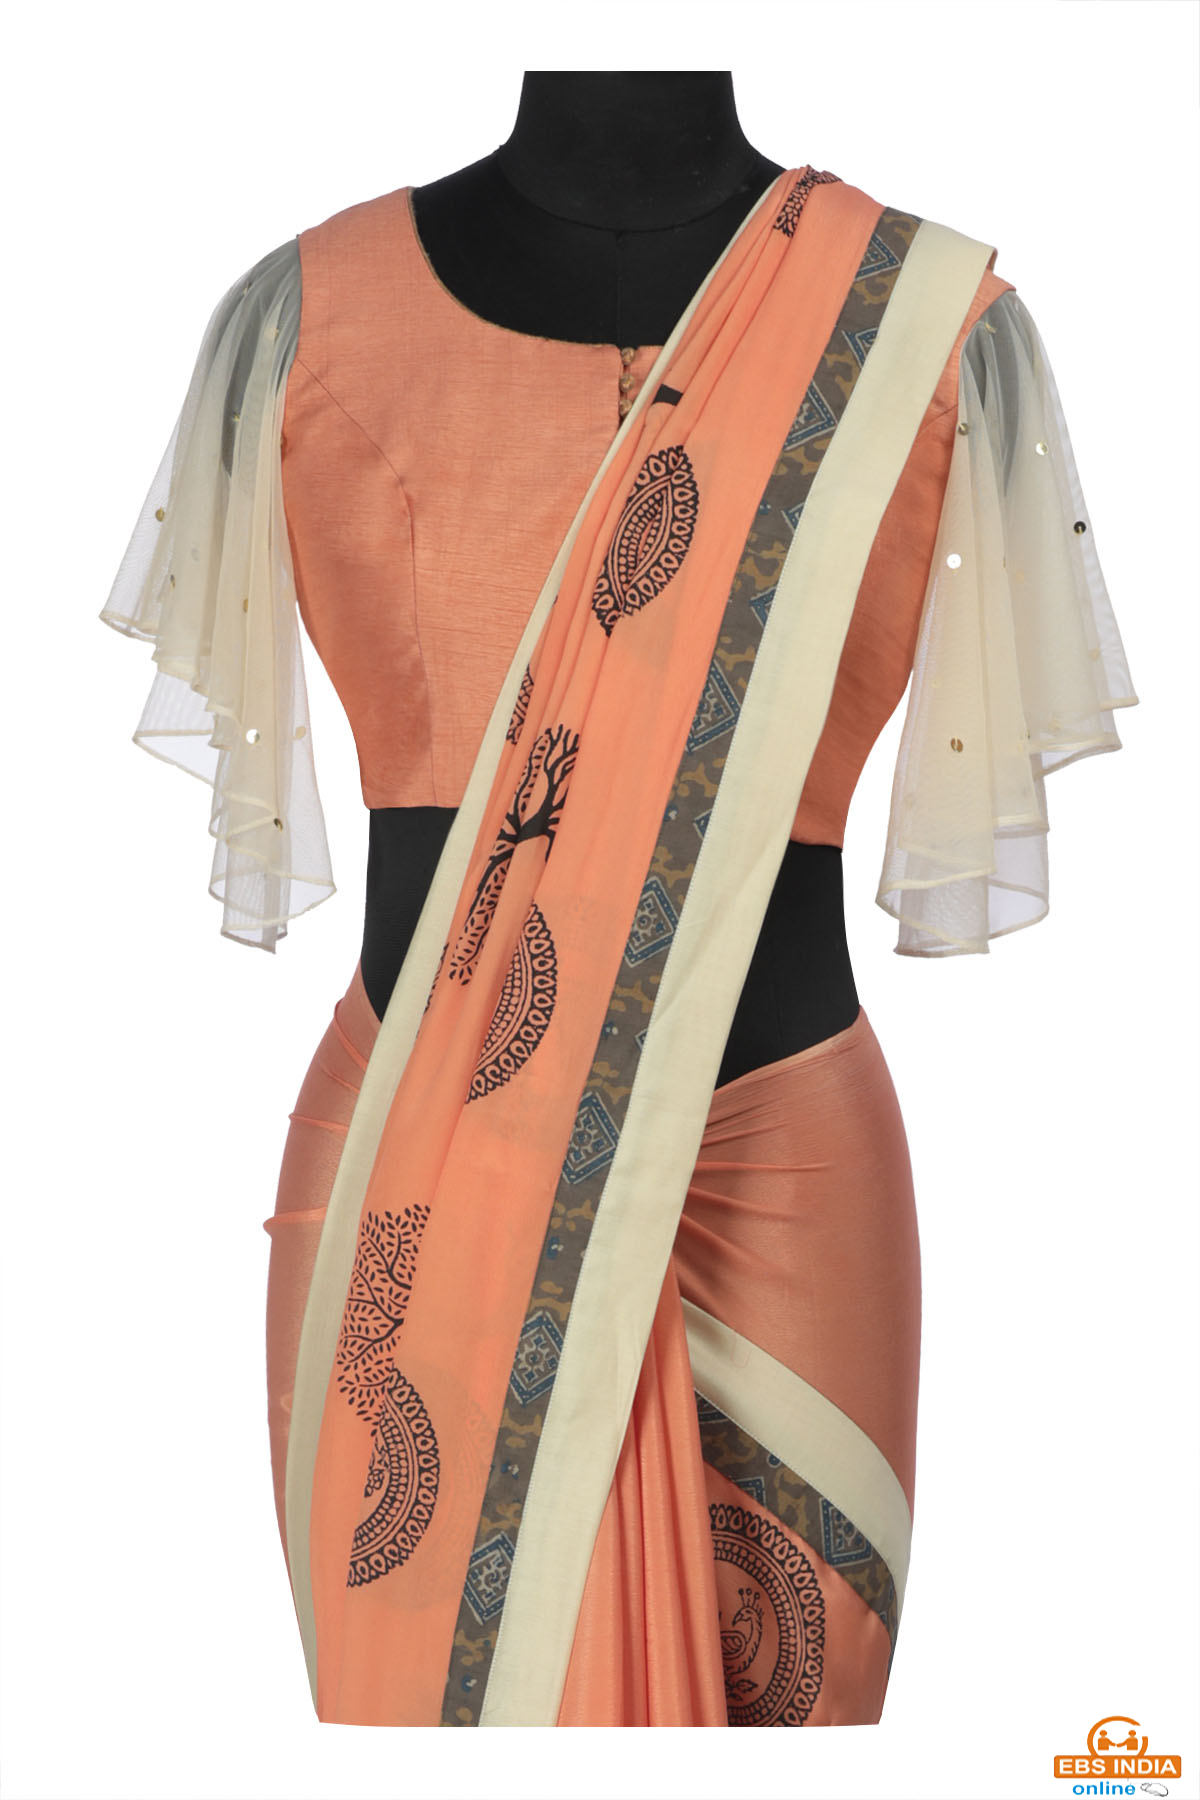 Shop For Printed Sarees From TheHLabel!